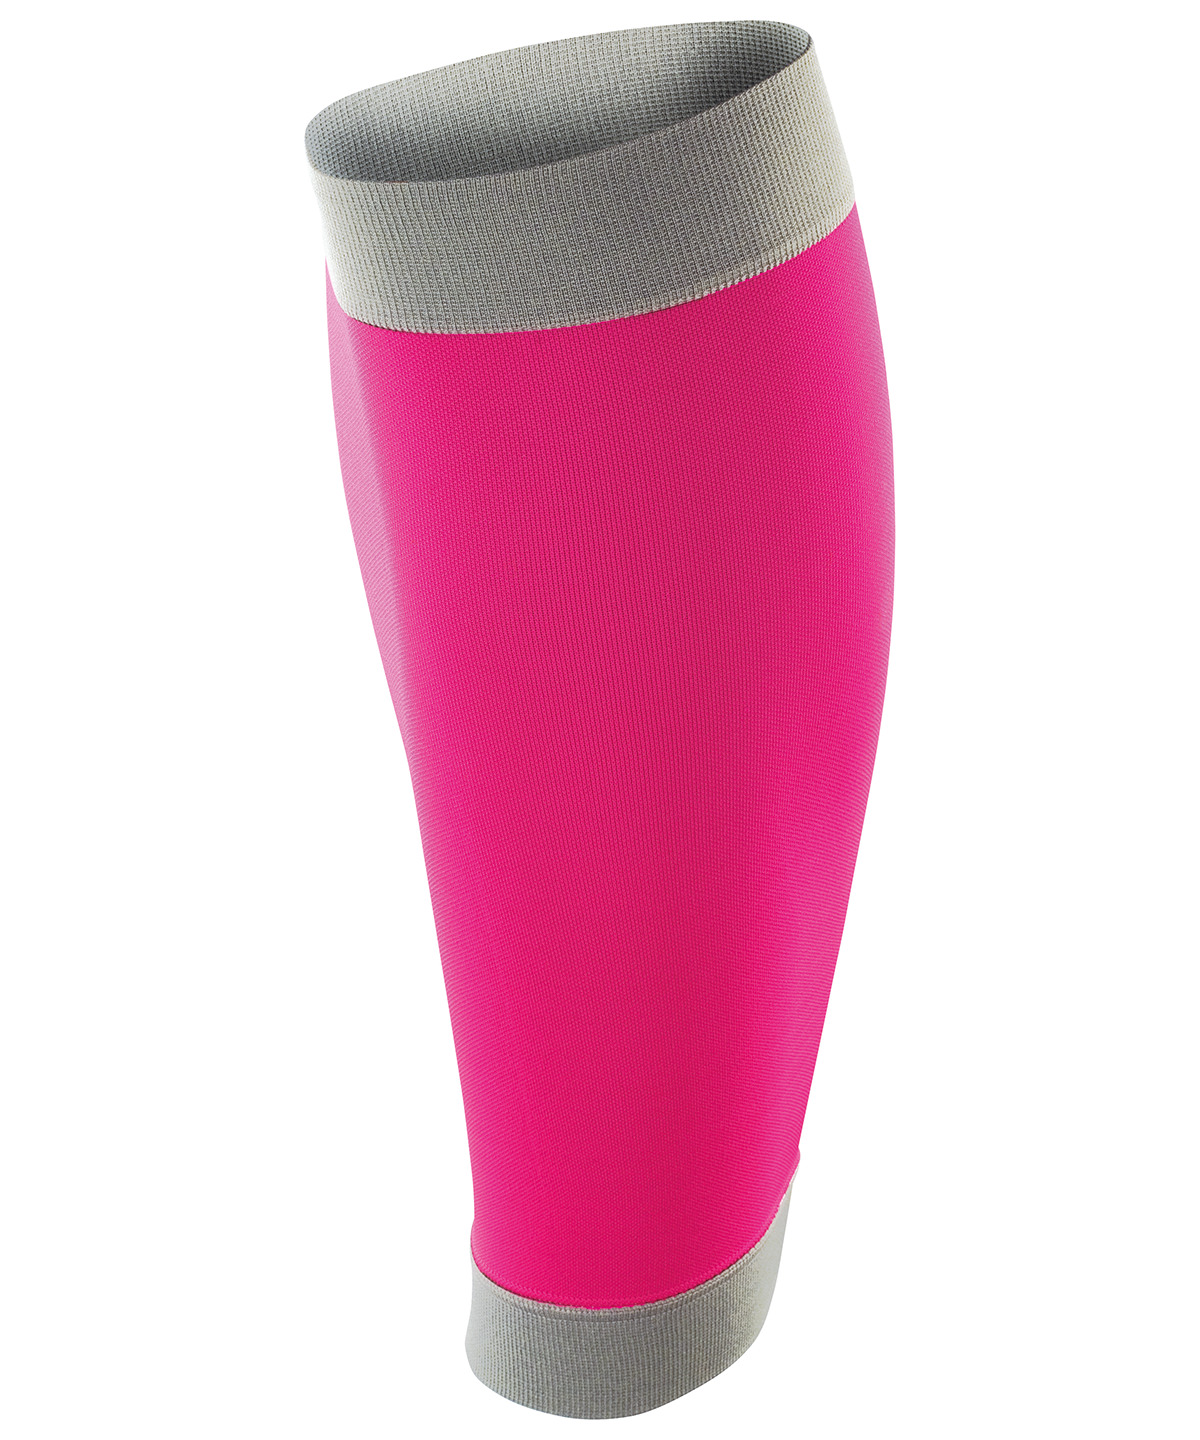 Spiro Compression Calf Guards Pink/Grey Size Large